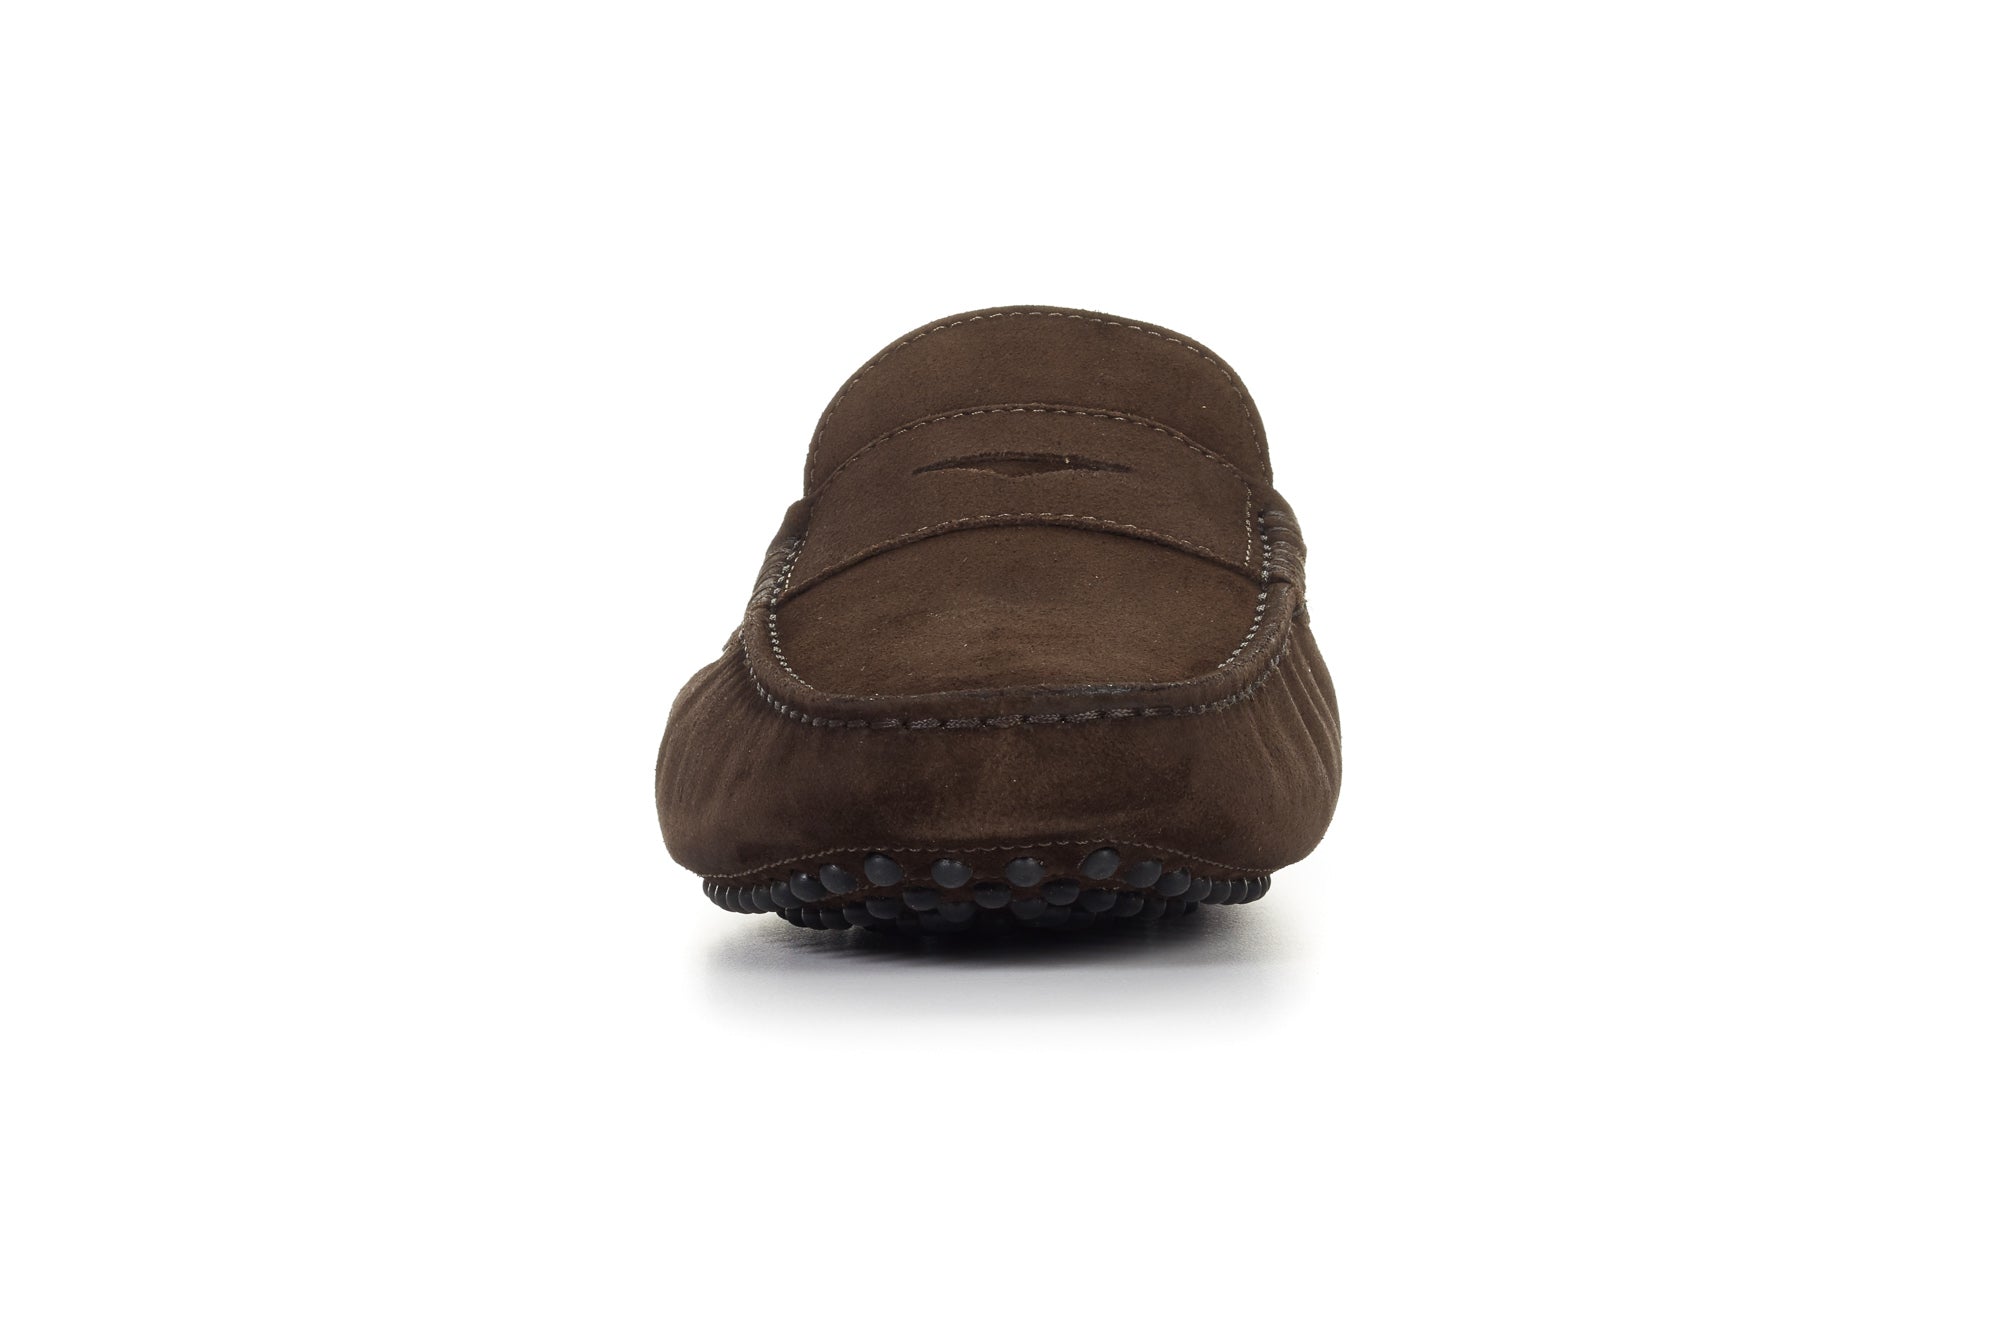 The McQueen Driving Loafer - Chocolate Suede